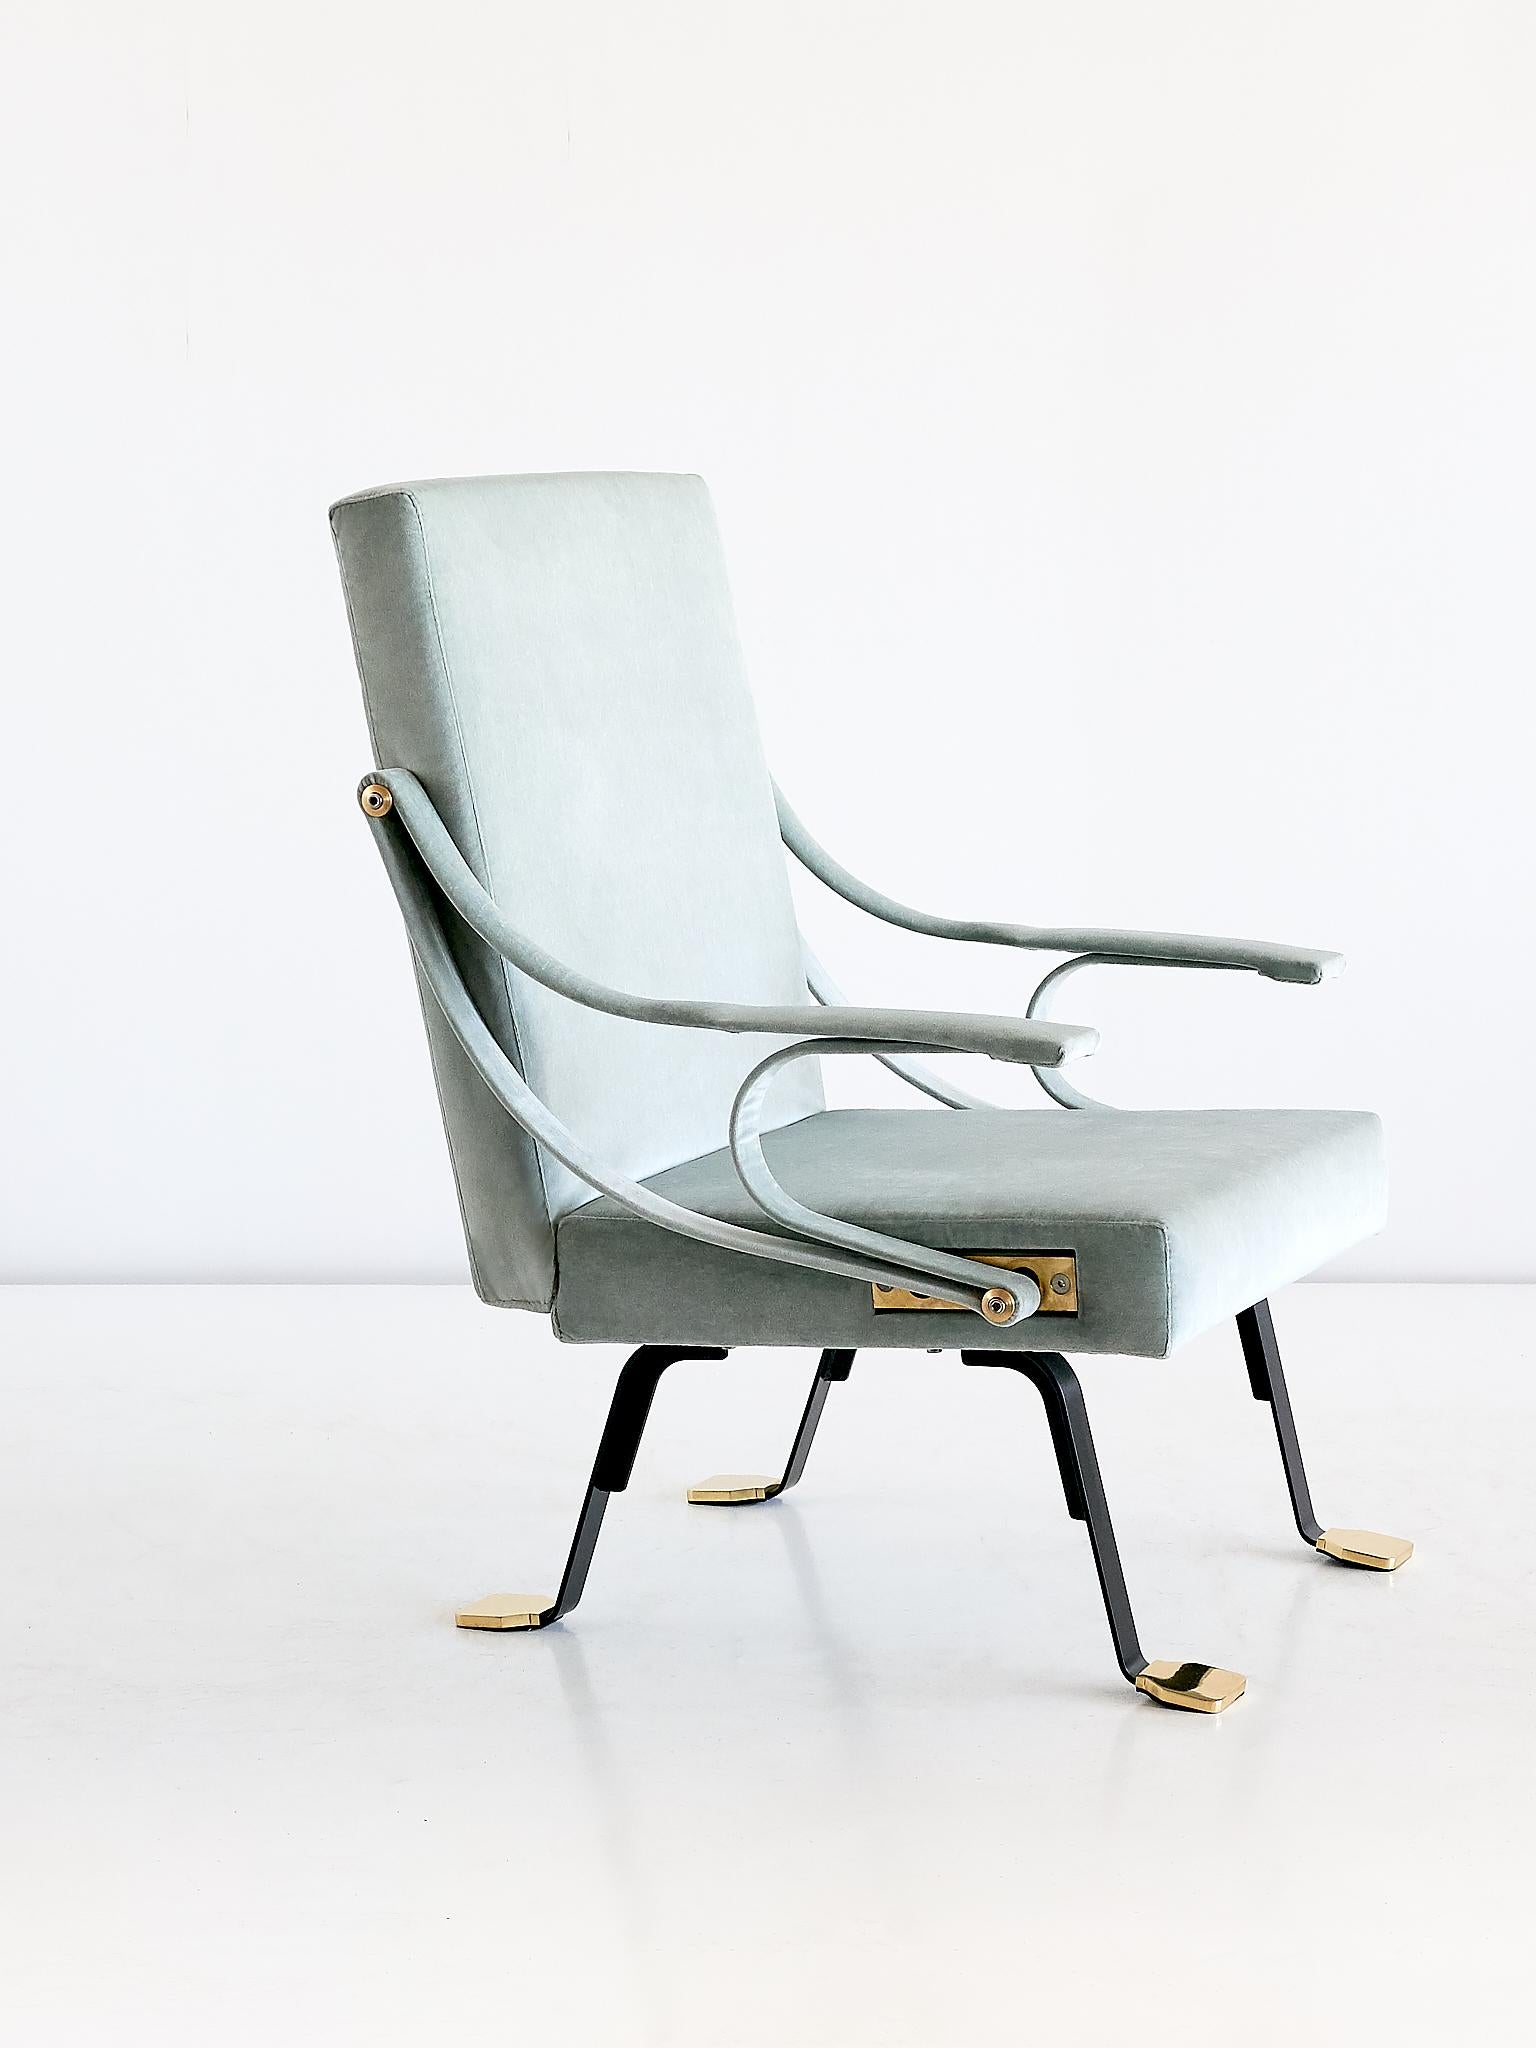 Metal Ignazio Gardella Digamma Lounge Chair and Ottoman in Turquoise Donghia Velvet